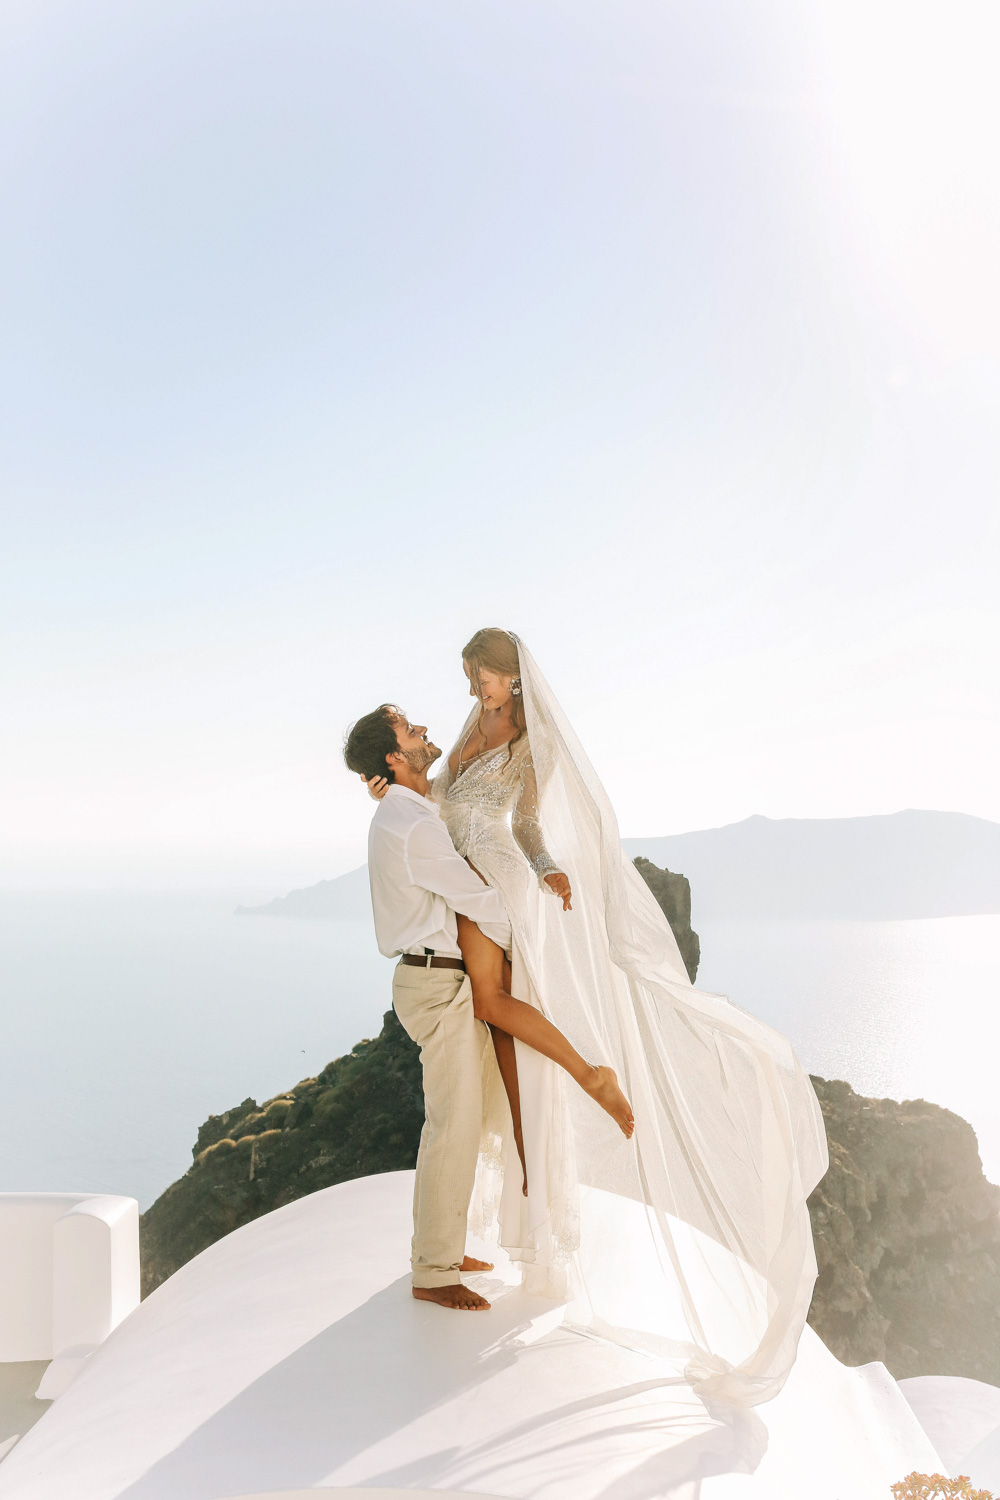 Picture the scene: whitewashed buildings clinging to the cliffs, infinite views across the Mediterranean and the allure of endless sunshine. Perched above the Aegean Sea, Grace Hotel of Auberge Resorts Collection really was the dreamiest backdrop for our recent workshop in Santorini.